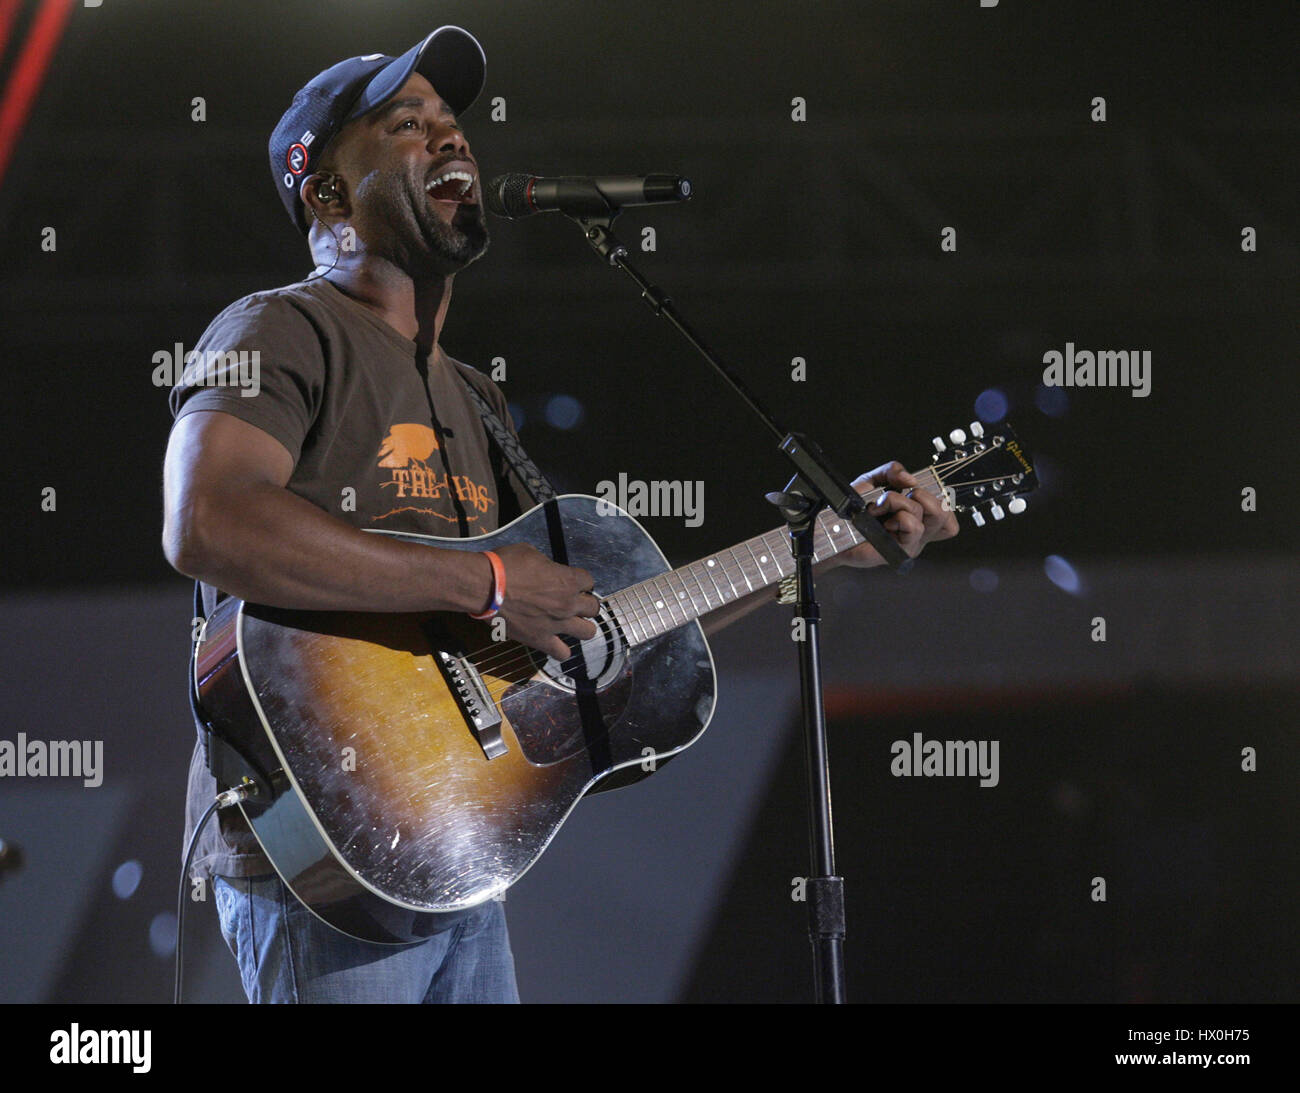 Darius Rucker performs during rehearsals for the 45th Academy of Country Music Awards at the MGM Grand Garden Arena in Las Vegas, Nevada on April 17, 2010. Photo by Francis Specker Stock Photo